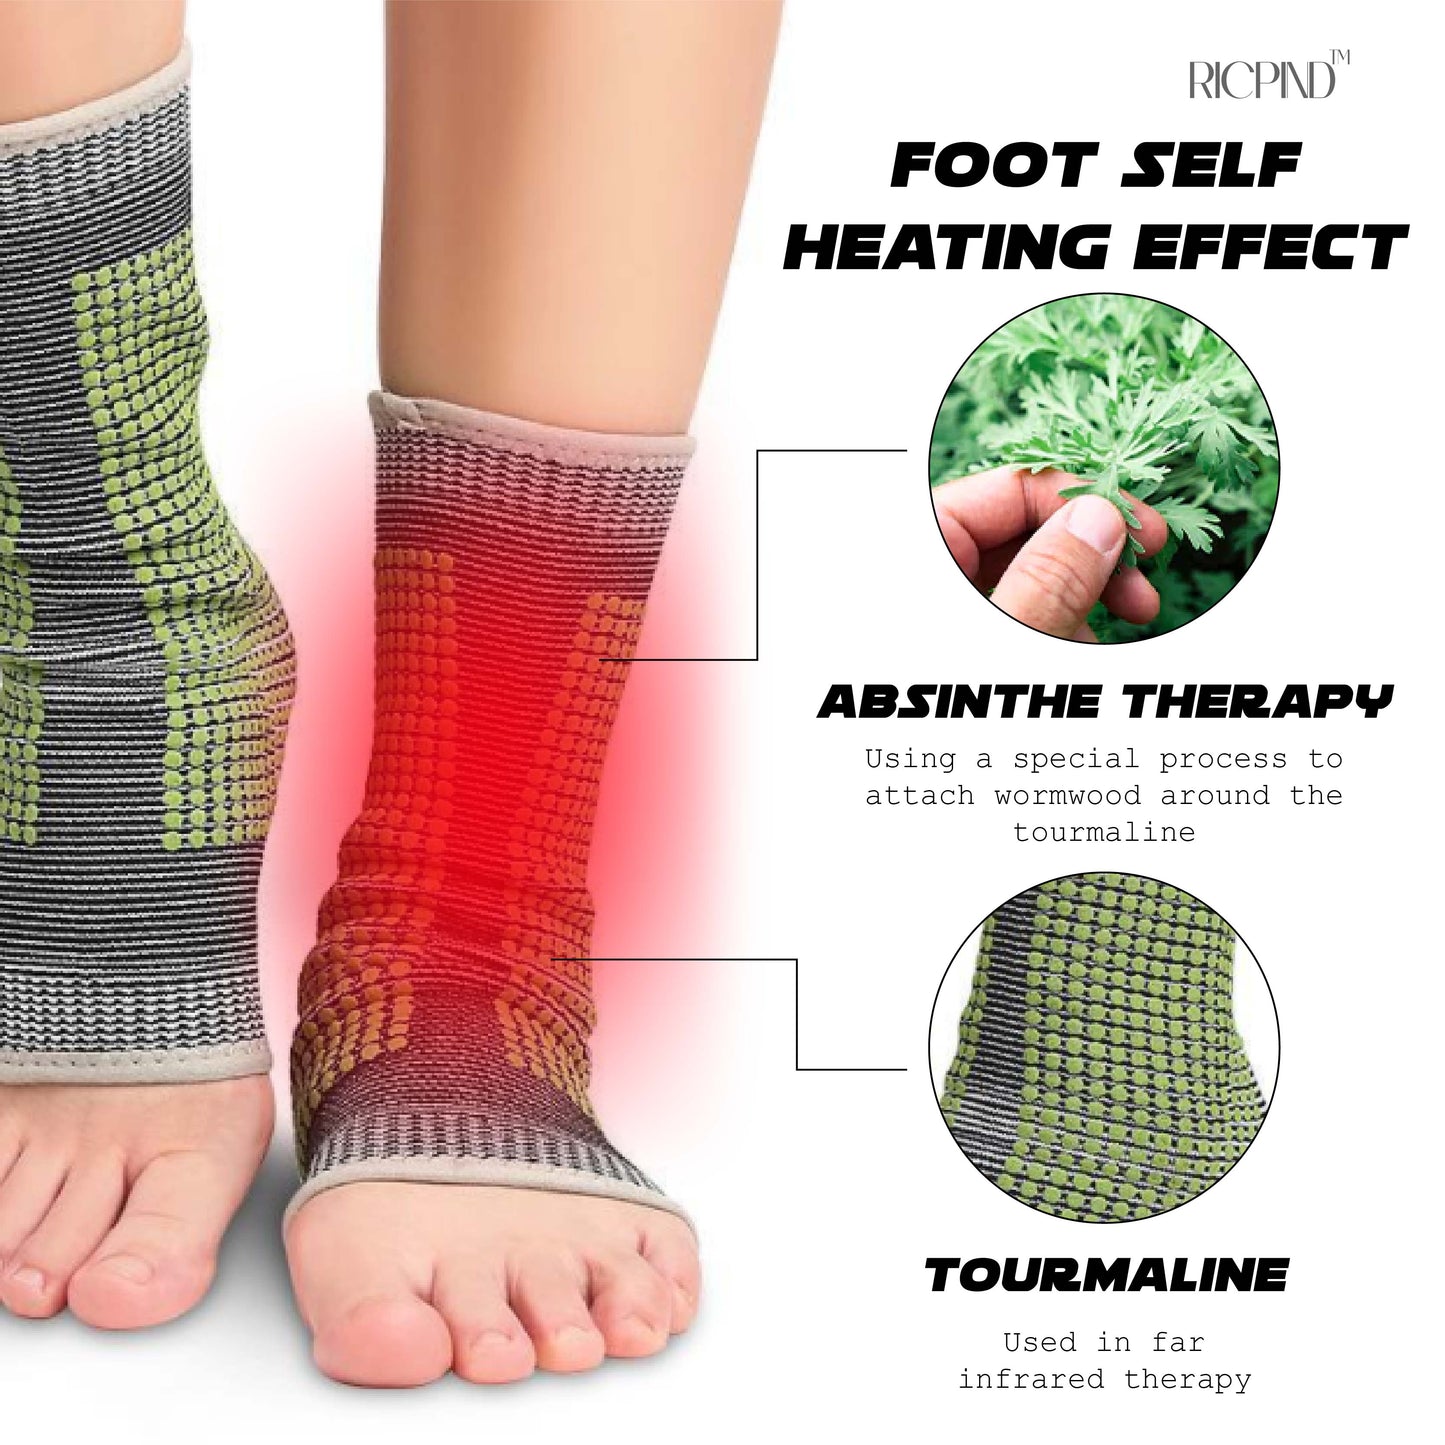 RICPIND AntiEdema ThermaRelax Compression Socks